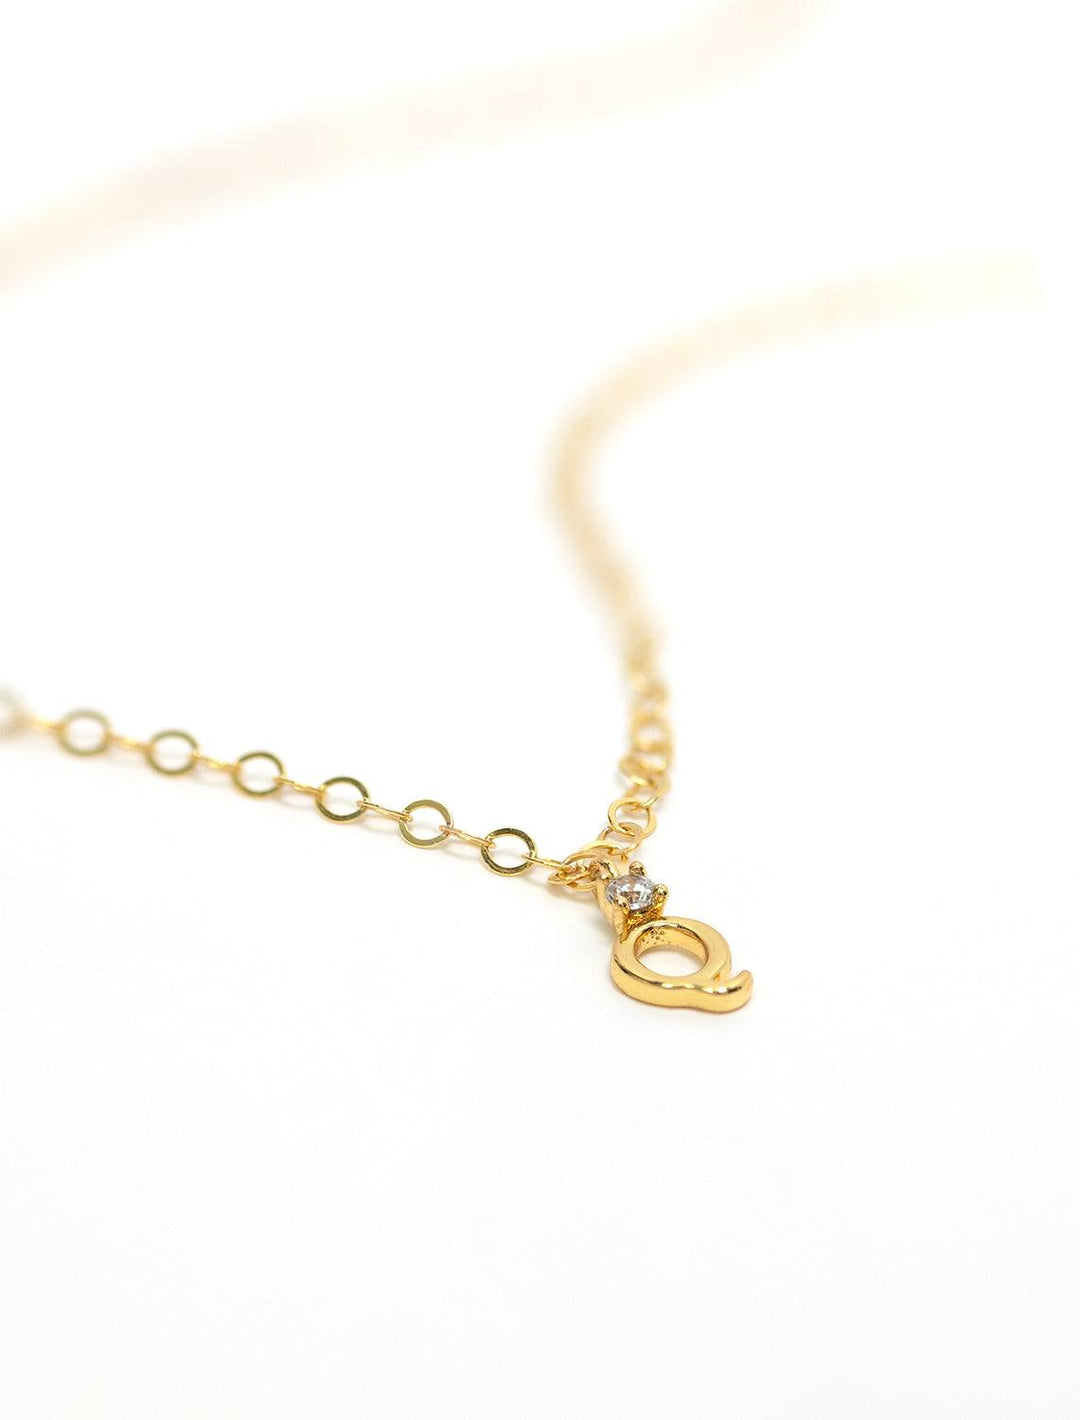 Marit Rae initial and cz necklace in gold | Q - Twigs